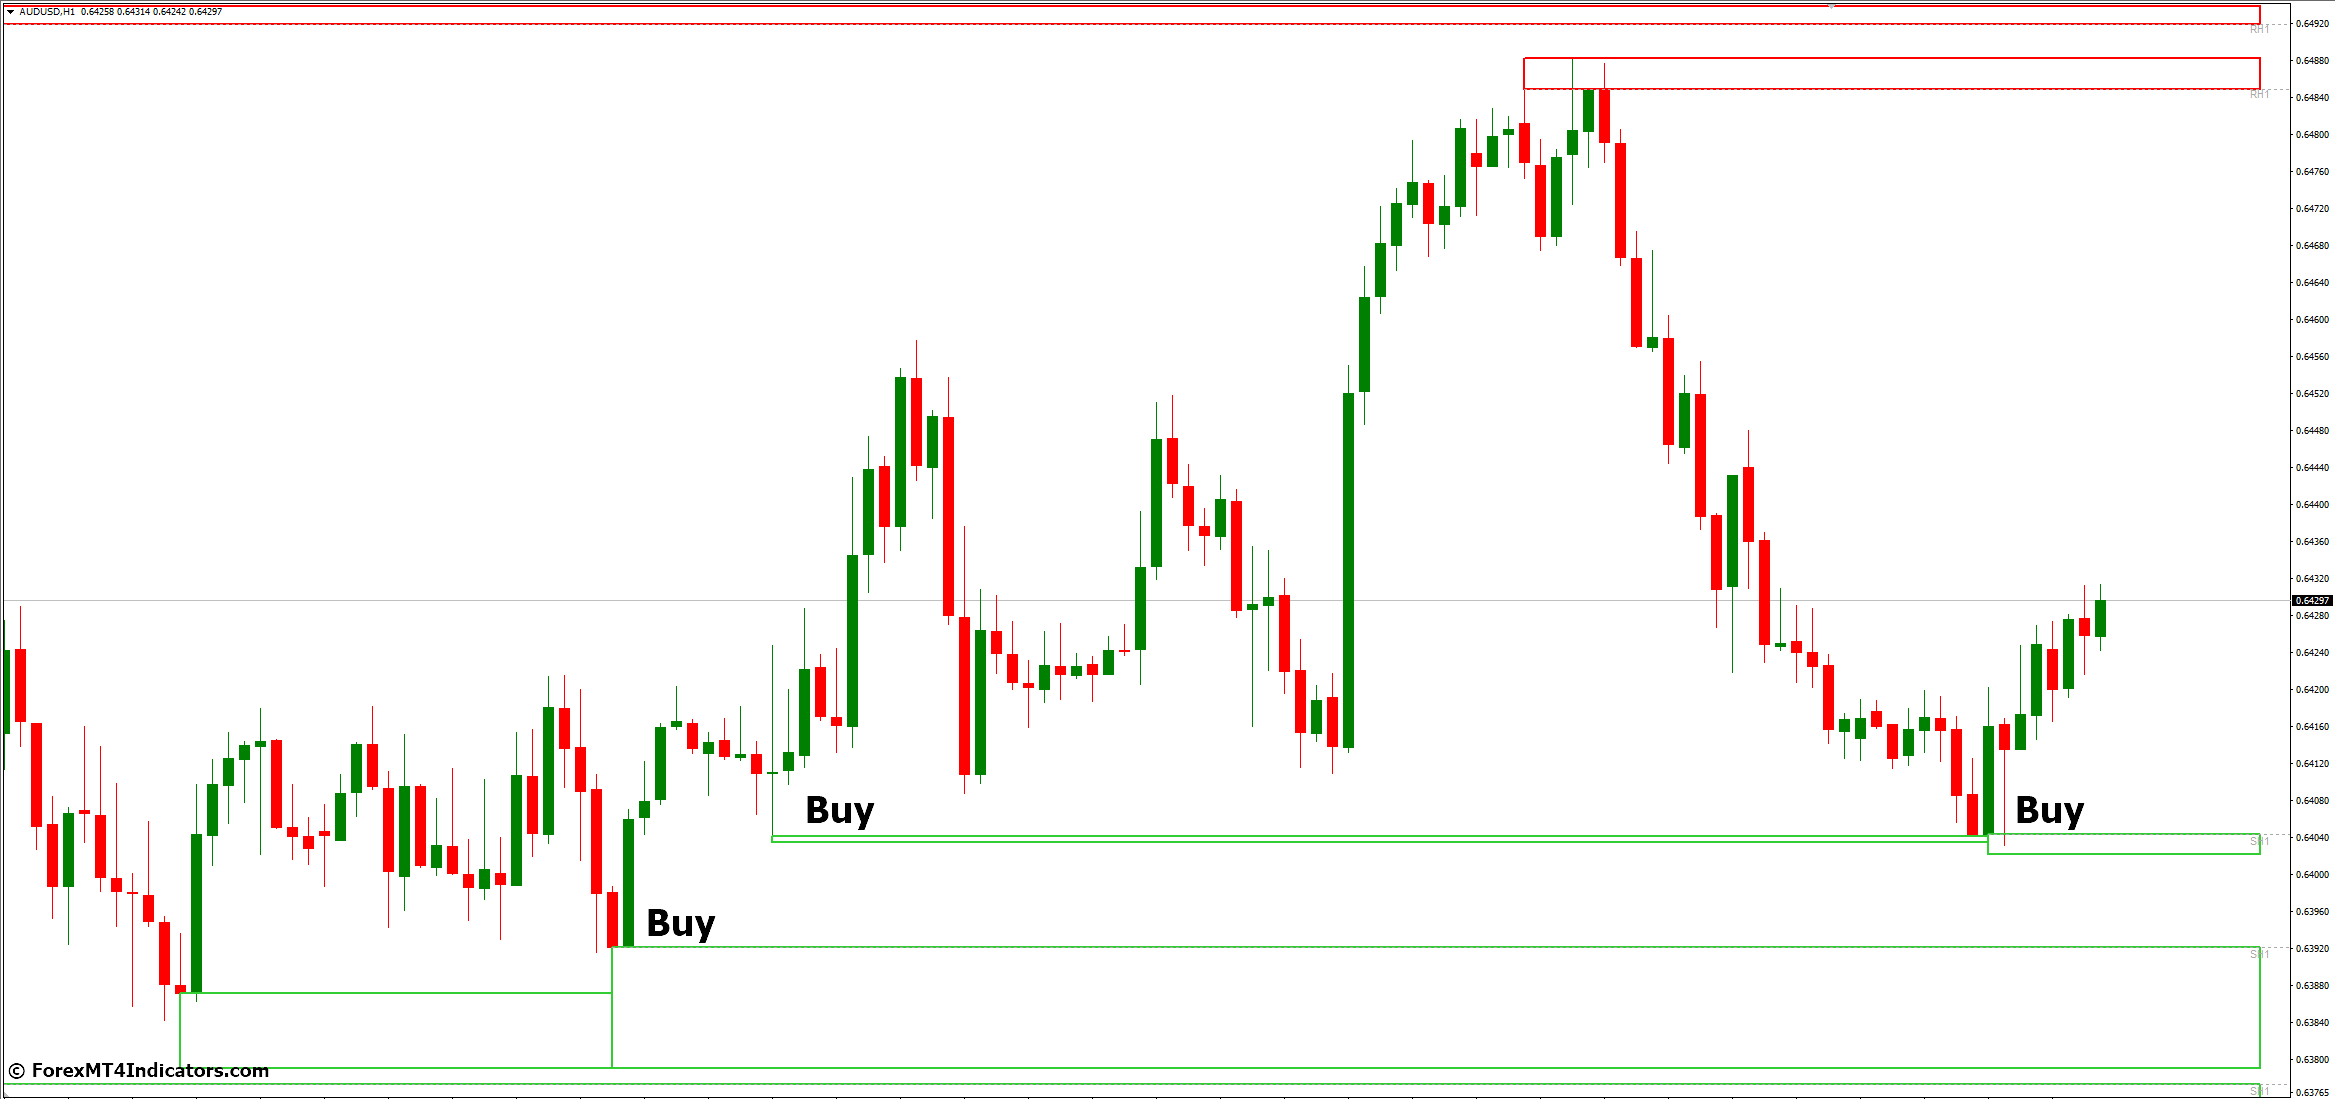 How to Trade with Zone MT4 Indicator - Buy Entry